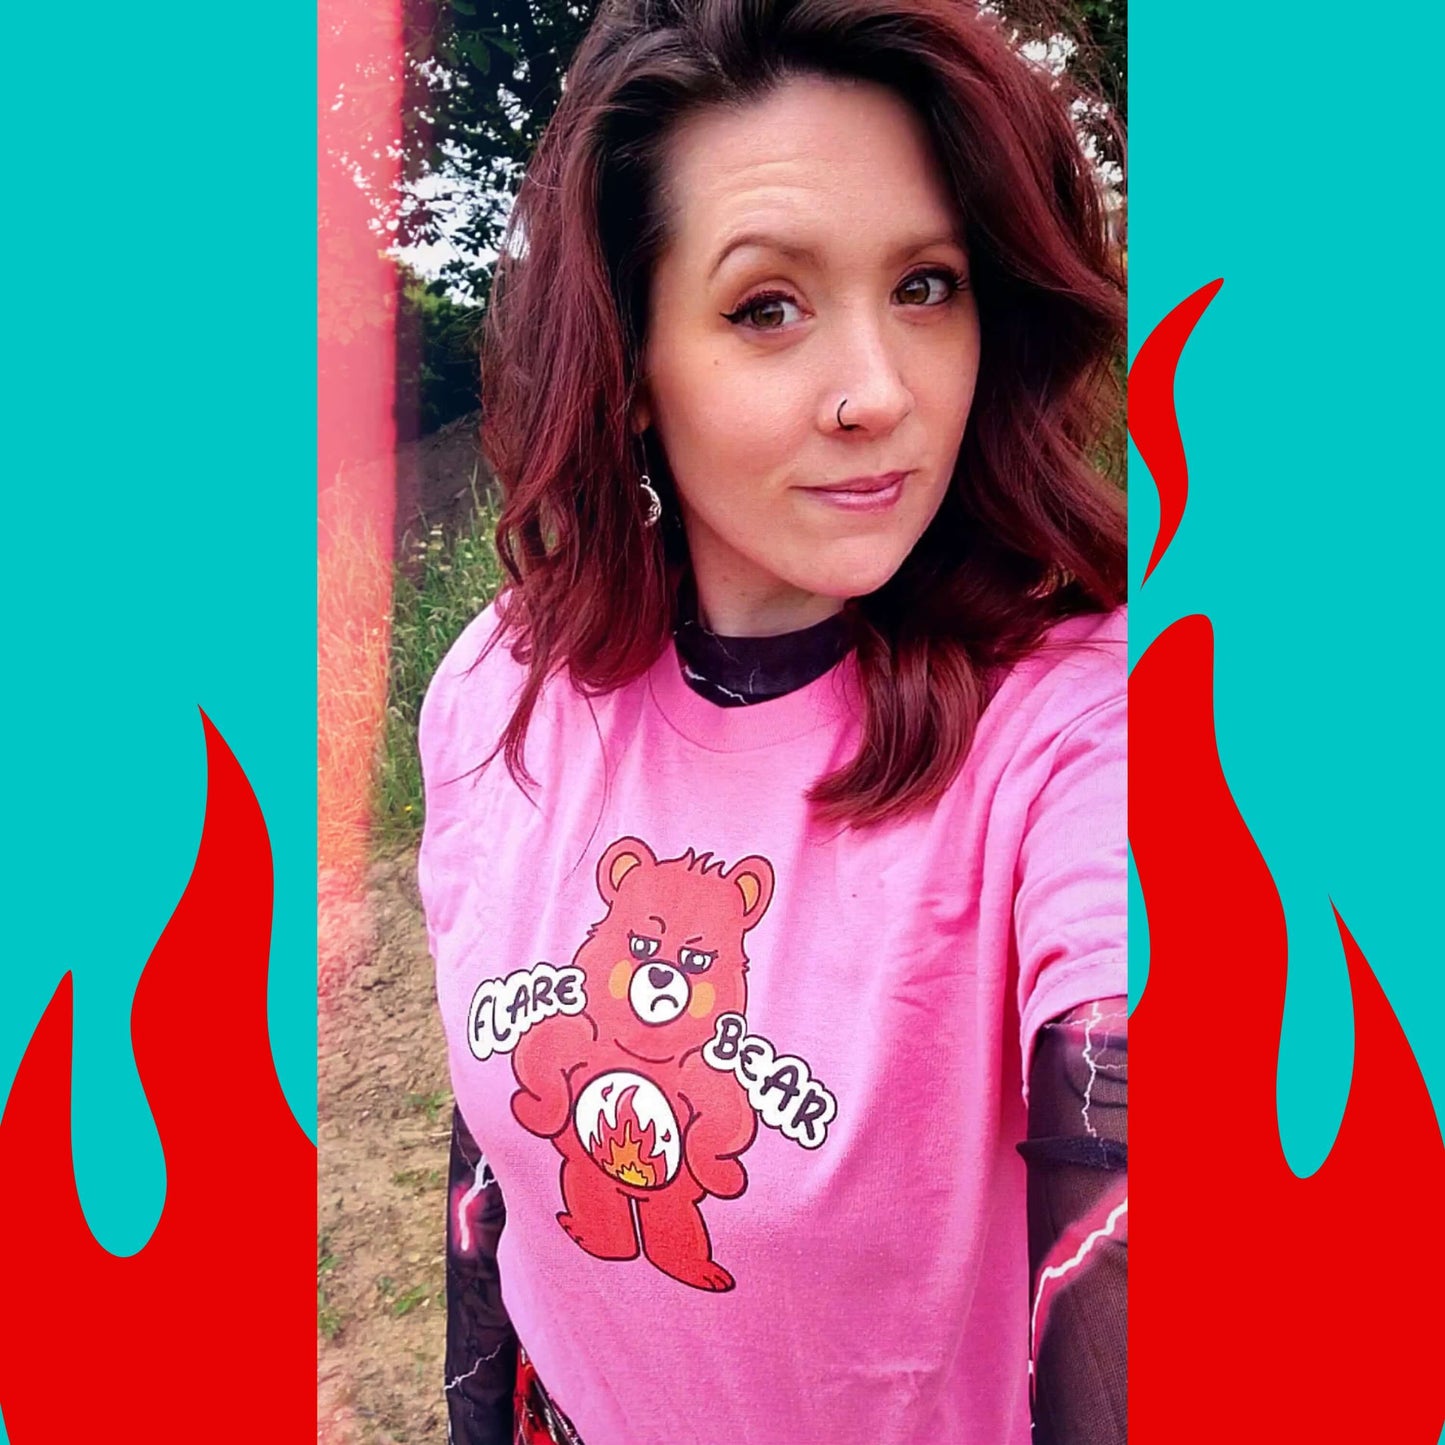 Nikky wearing a pink Flare Bear T-shirt stood outside with red tartan trousers, a pink and black lightning bolt mesh top. The pastel pink tee is of a red bear with a fed up expression and hands on its hips. There is a white circle on its belly with flames inside. Flare Bear is written on the middle. The tshirt is designed to raise awareness for chronic illness flare ups.